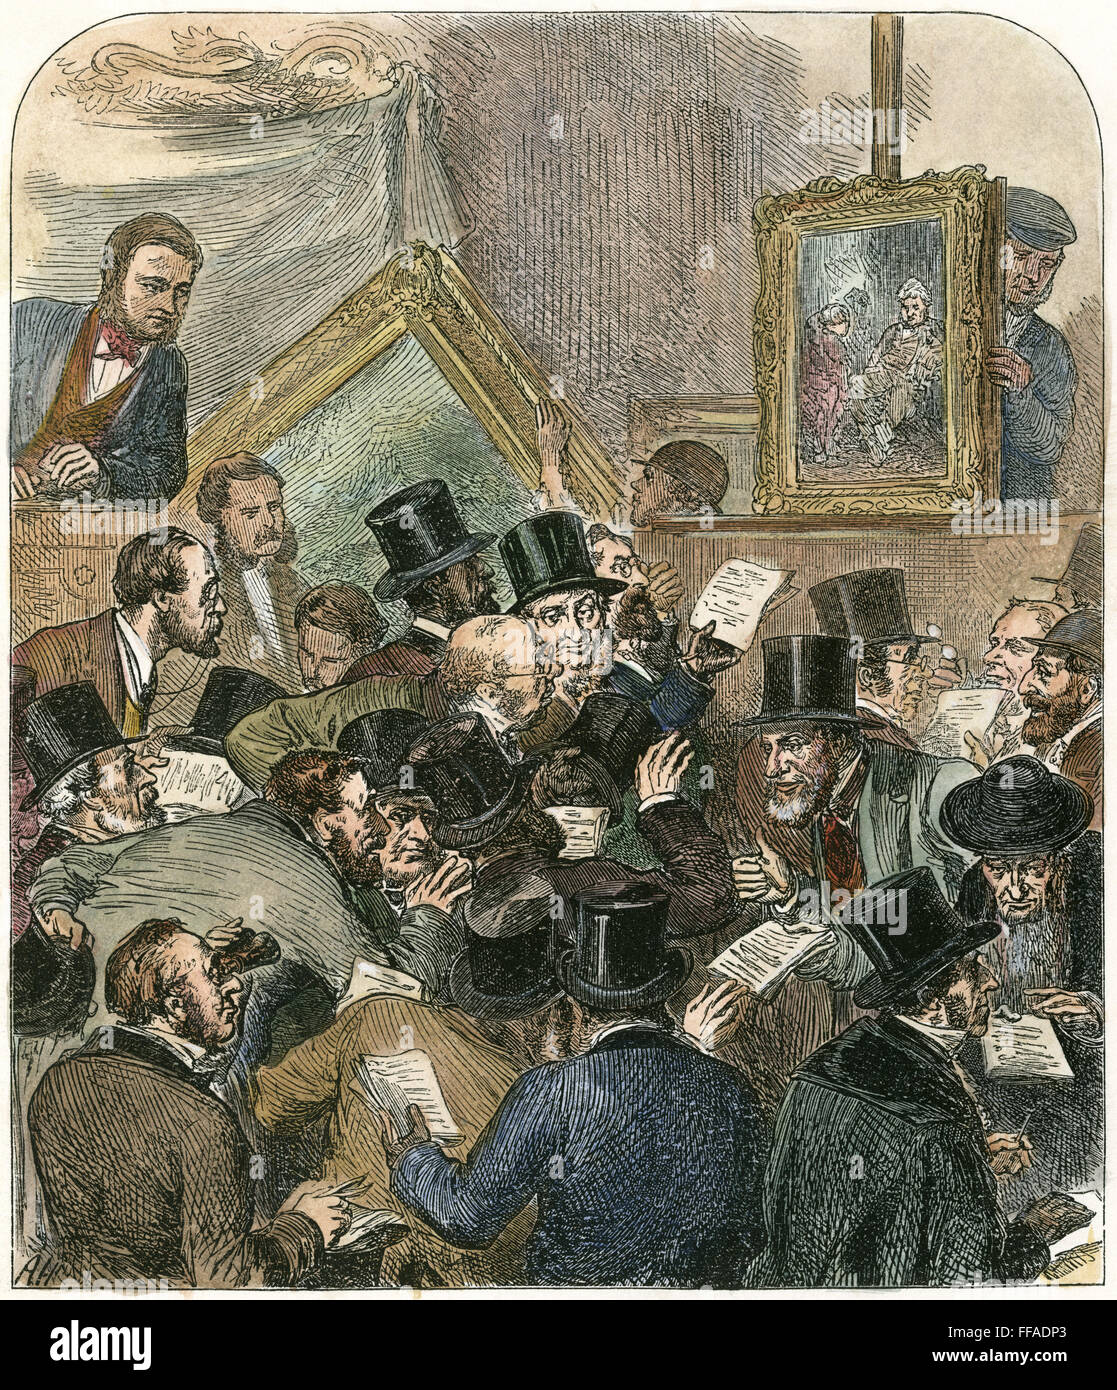 PAINTING AUCTION, 1882./nAn auction of paintings in London. Wood engraving, English, 1882. Stock Photo